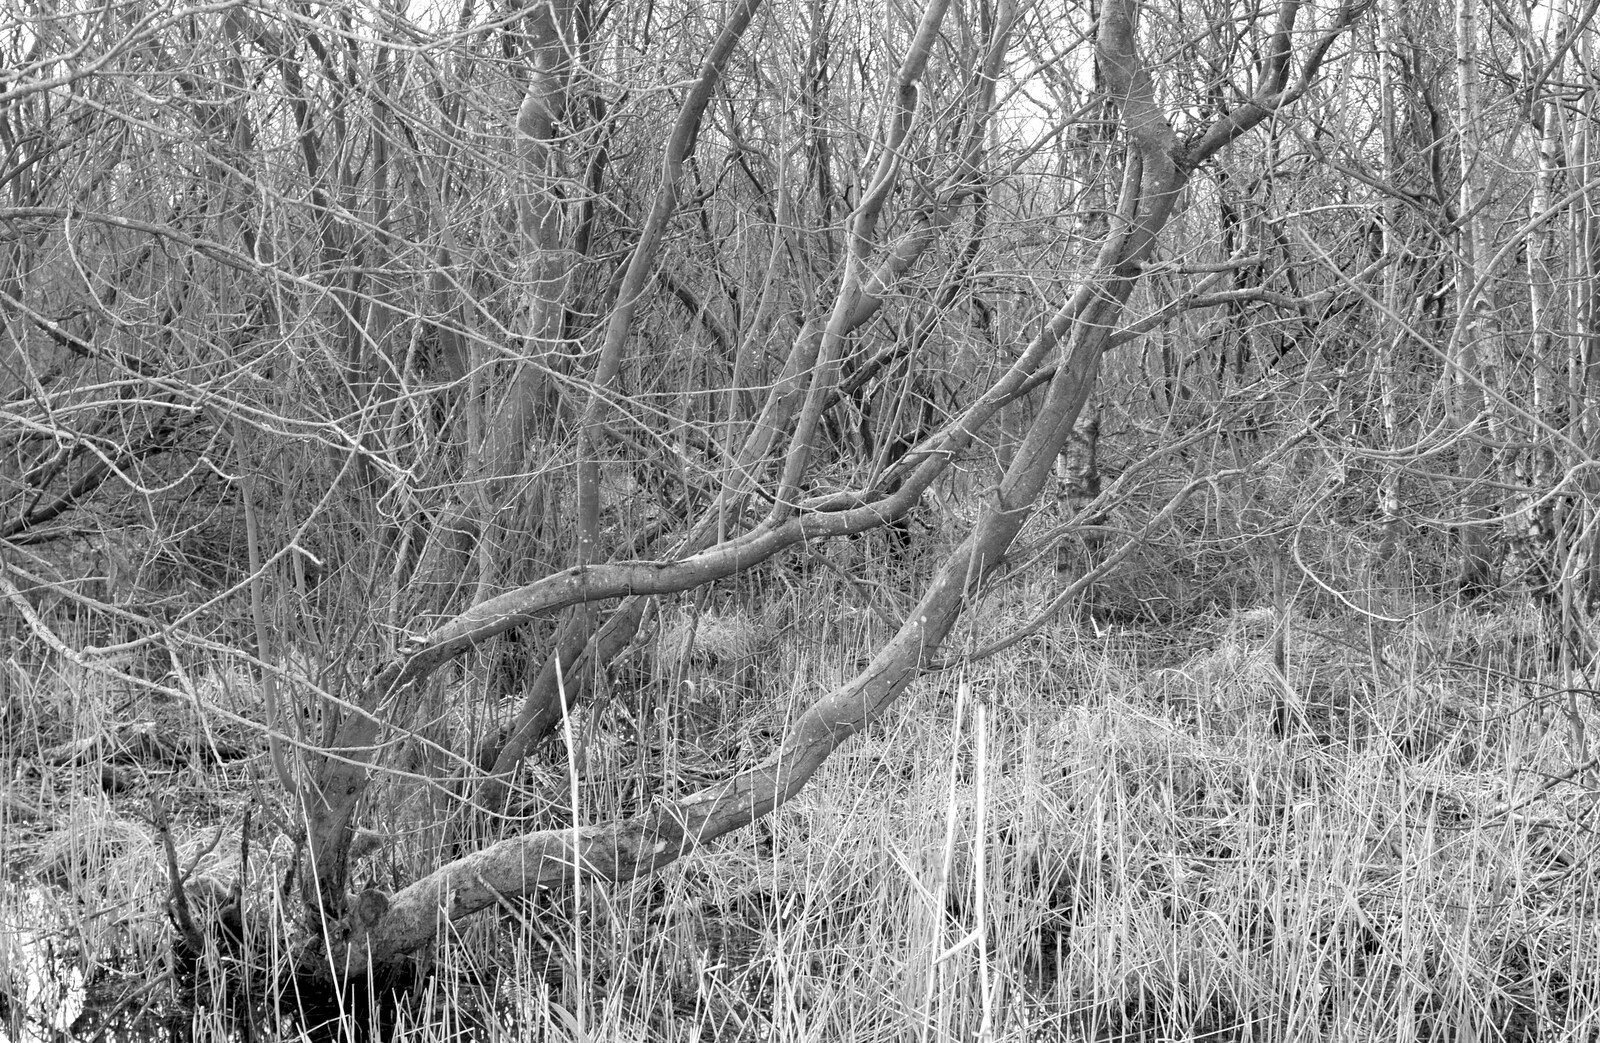 A tangle of trees like a Mangrove swamp from Redgrave and Lopham Fen, Suffolk Border - 11th March 2017